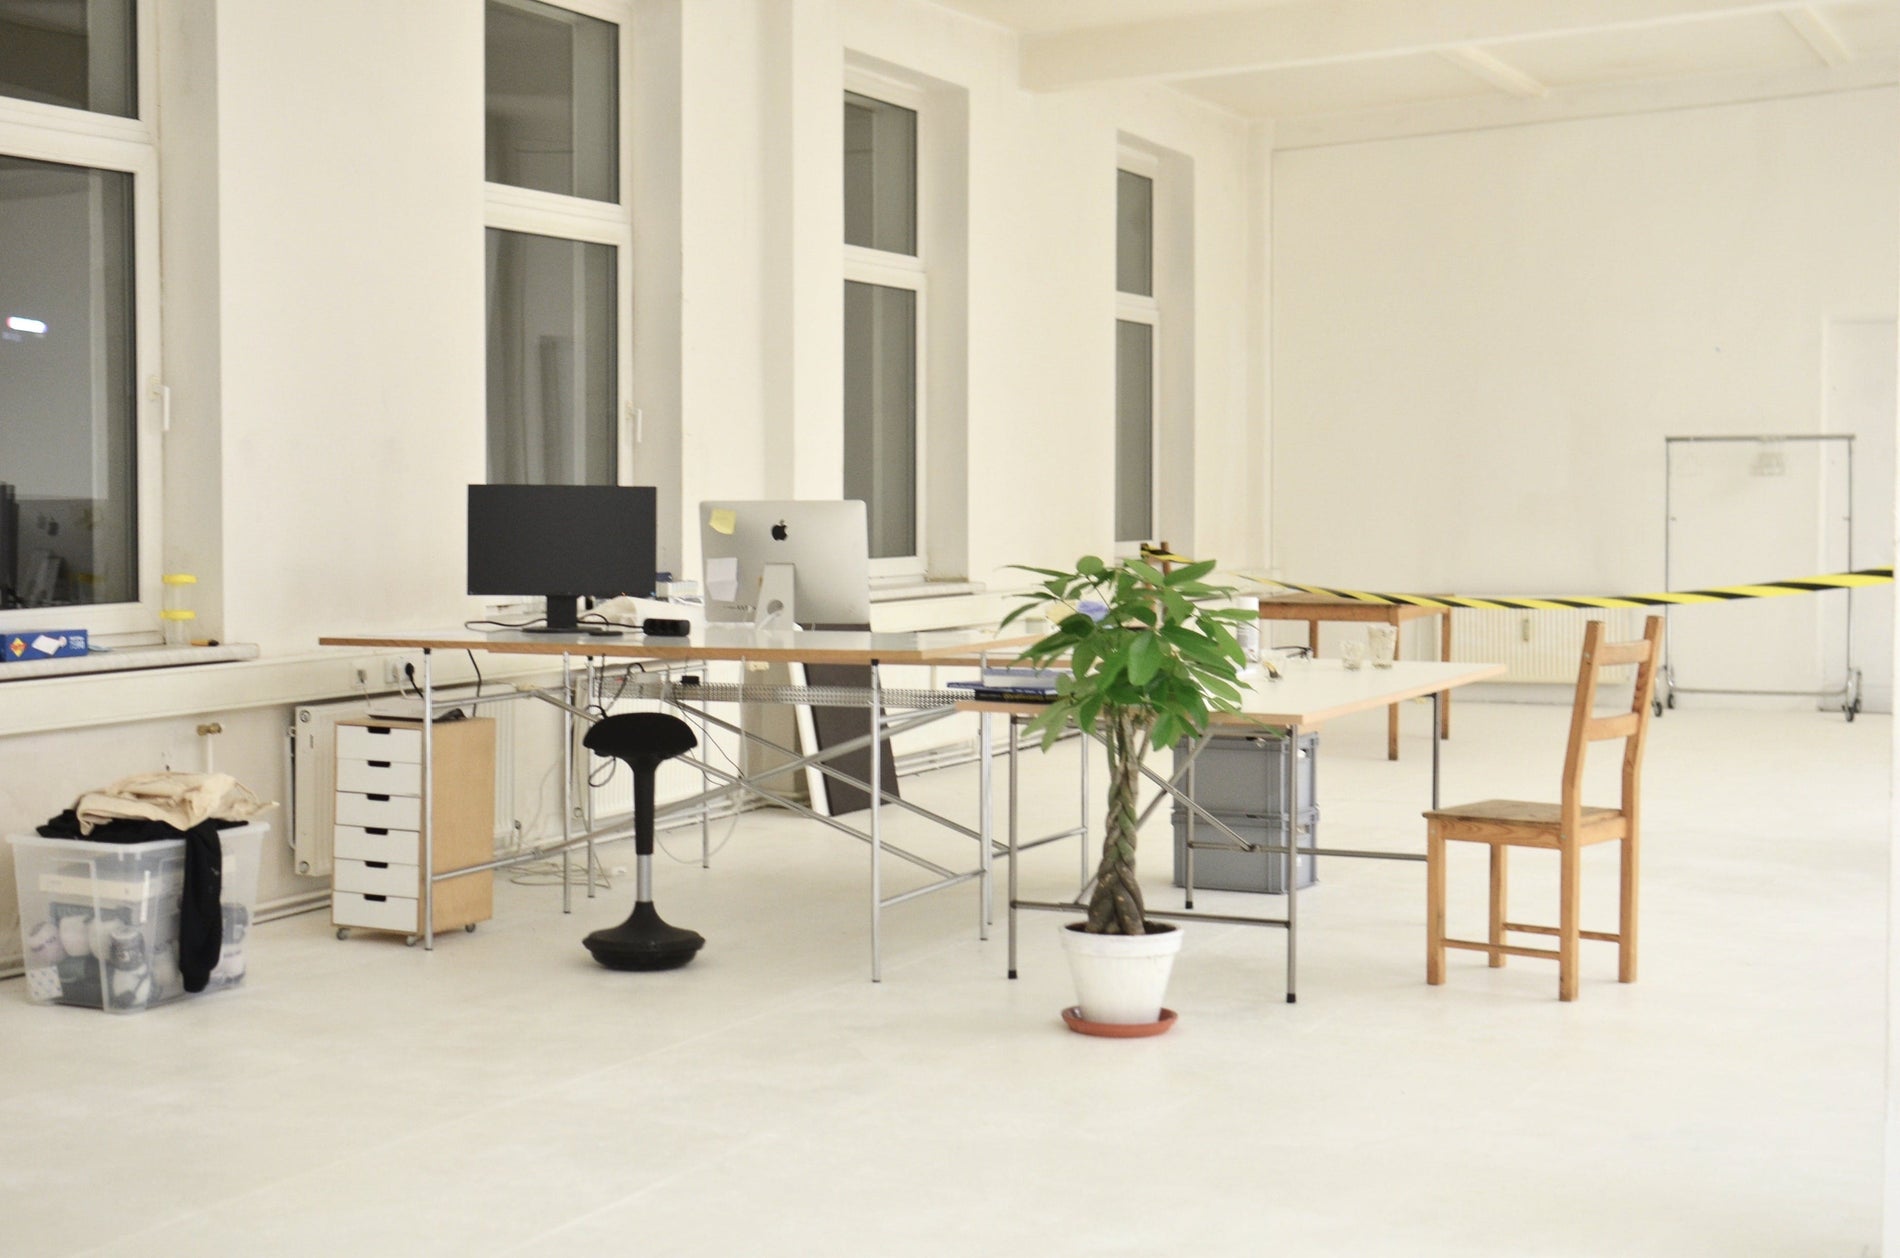 How Long Should Commercial Office Furniture Last?